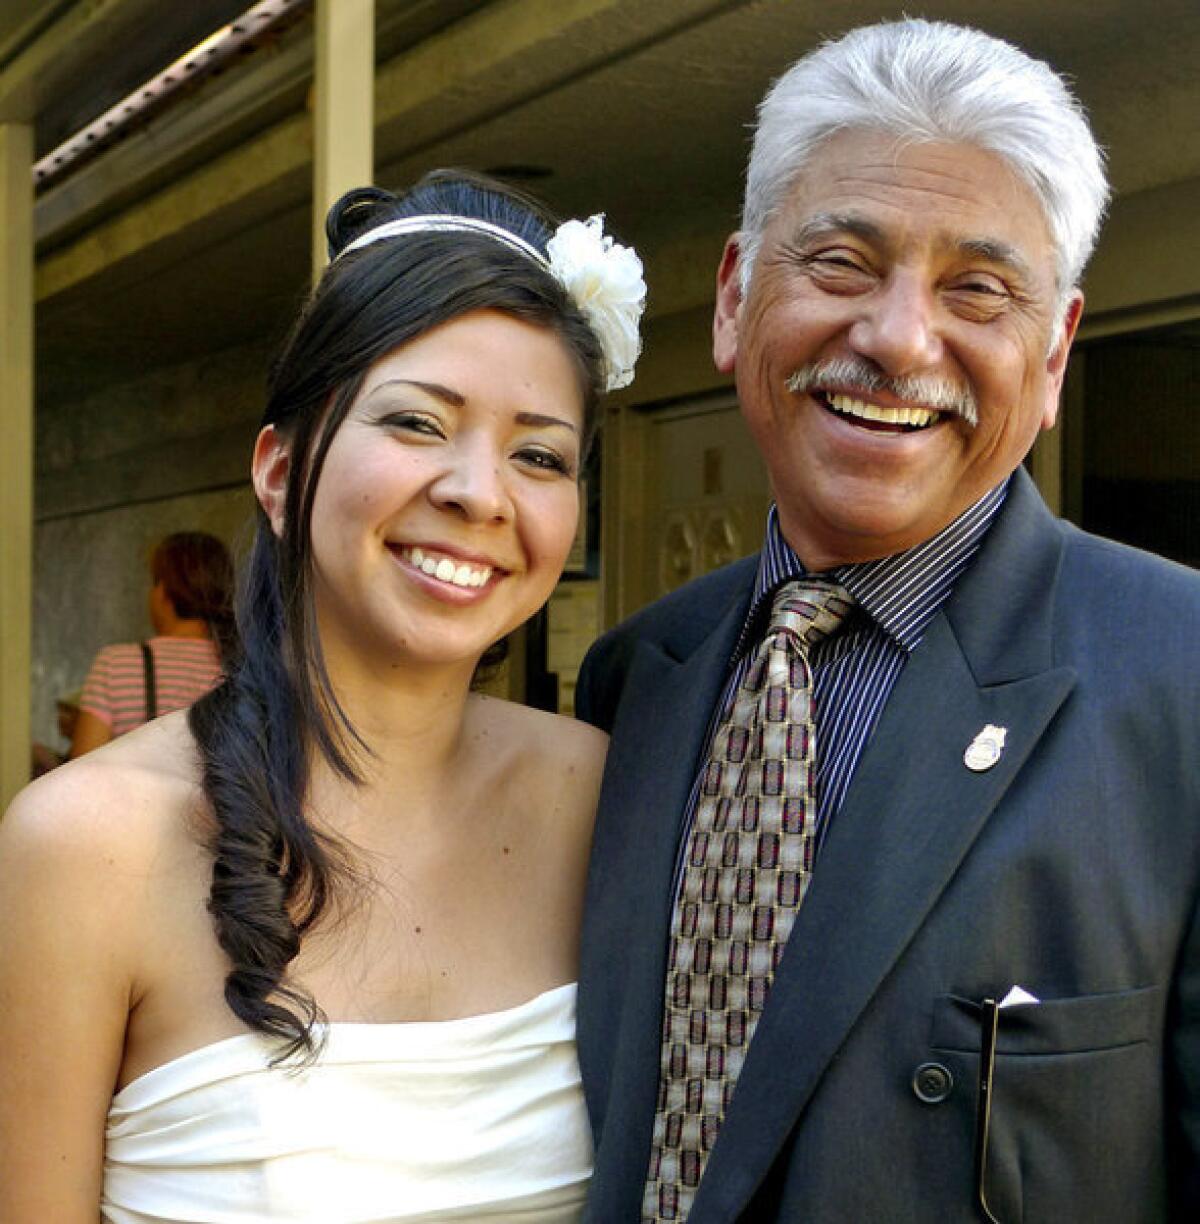 Gerardo Herrejon, 68 and his wife Ana, age 27 on their wedding day in Los Angeles.